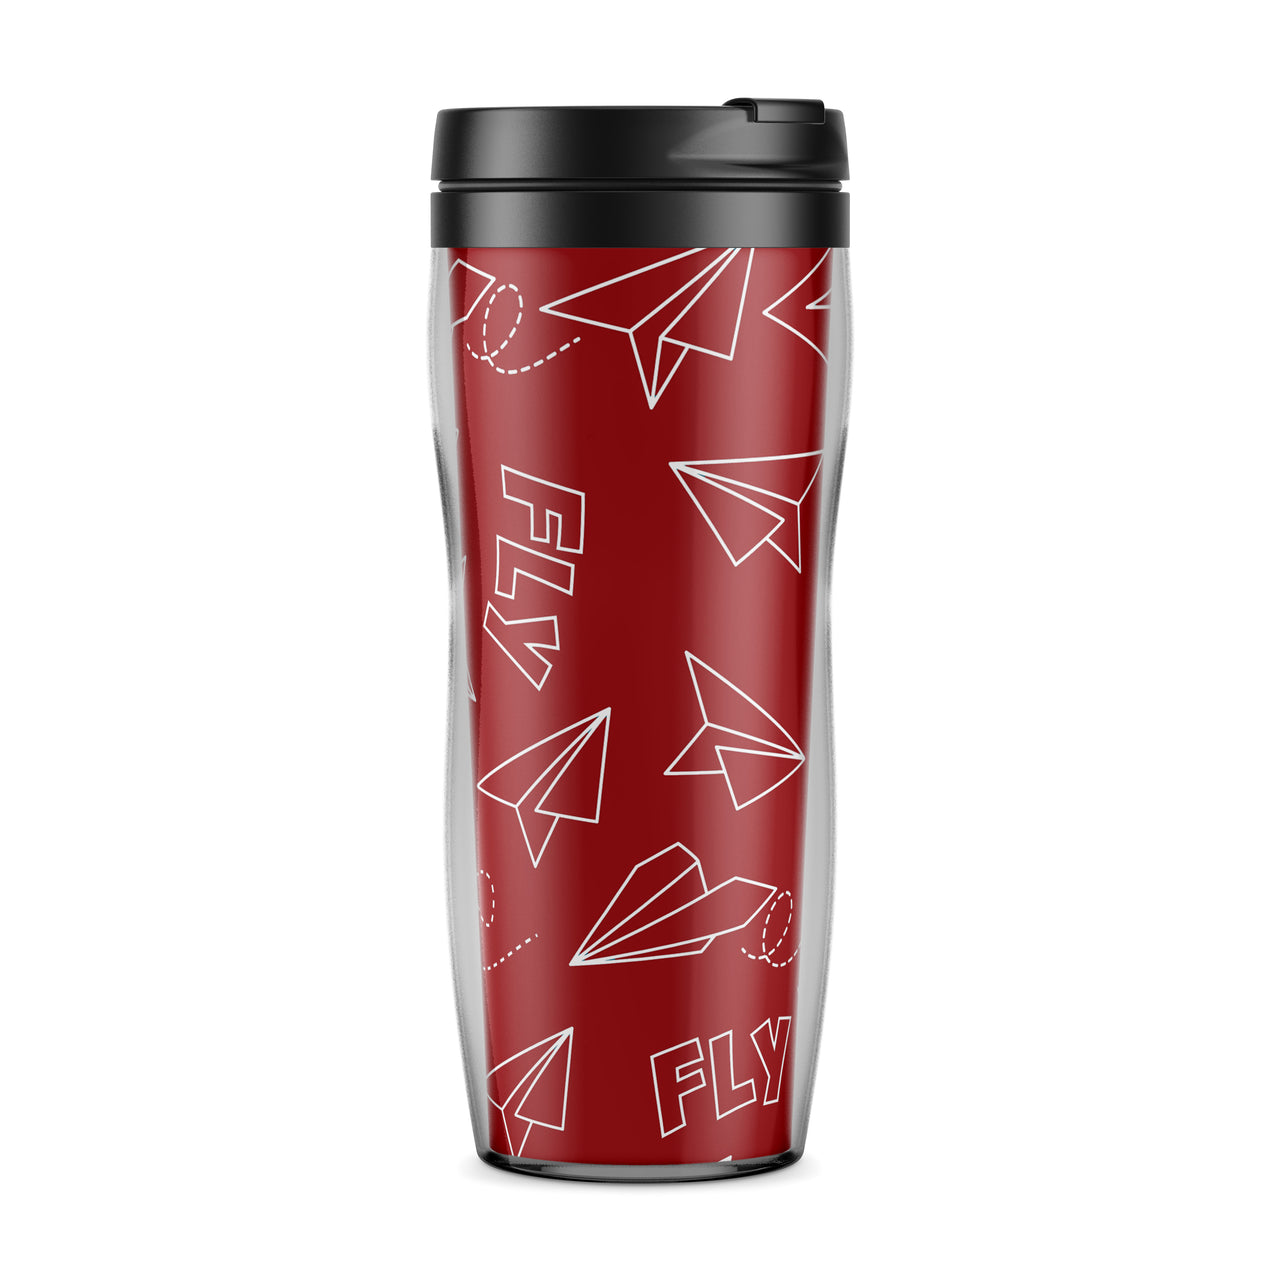 Paper Airplane & Fly-Red Designed Travel Mugs